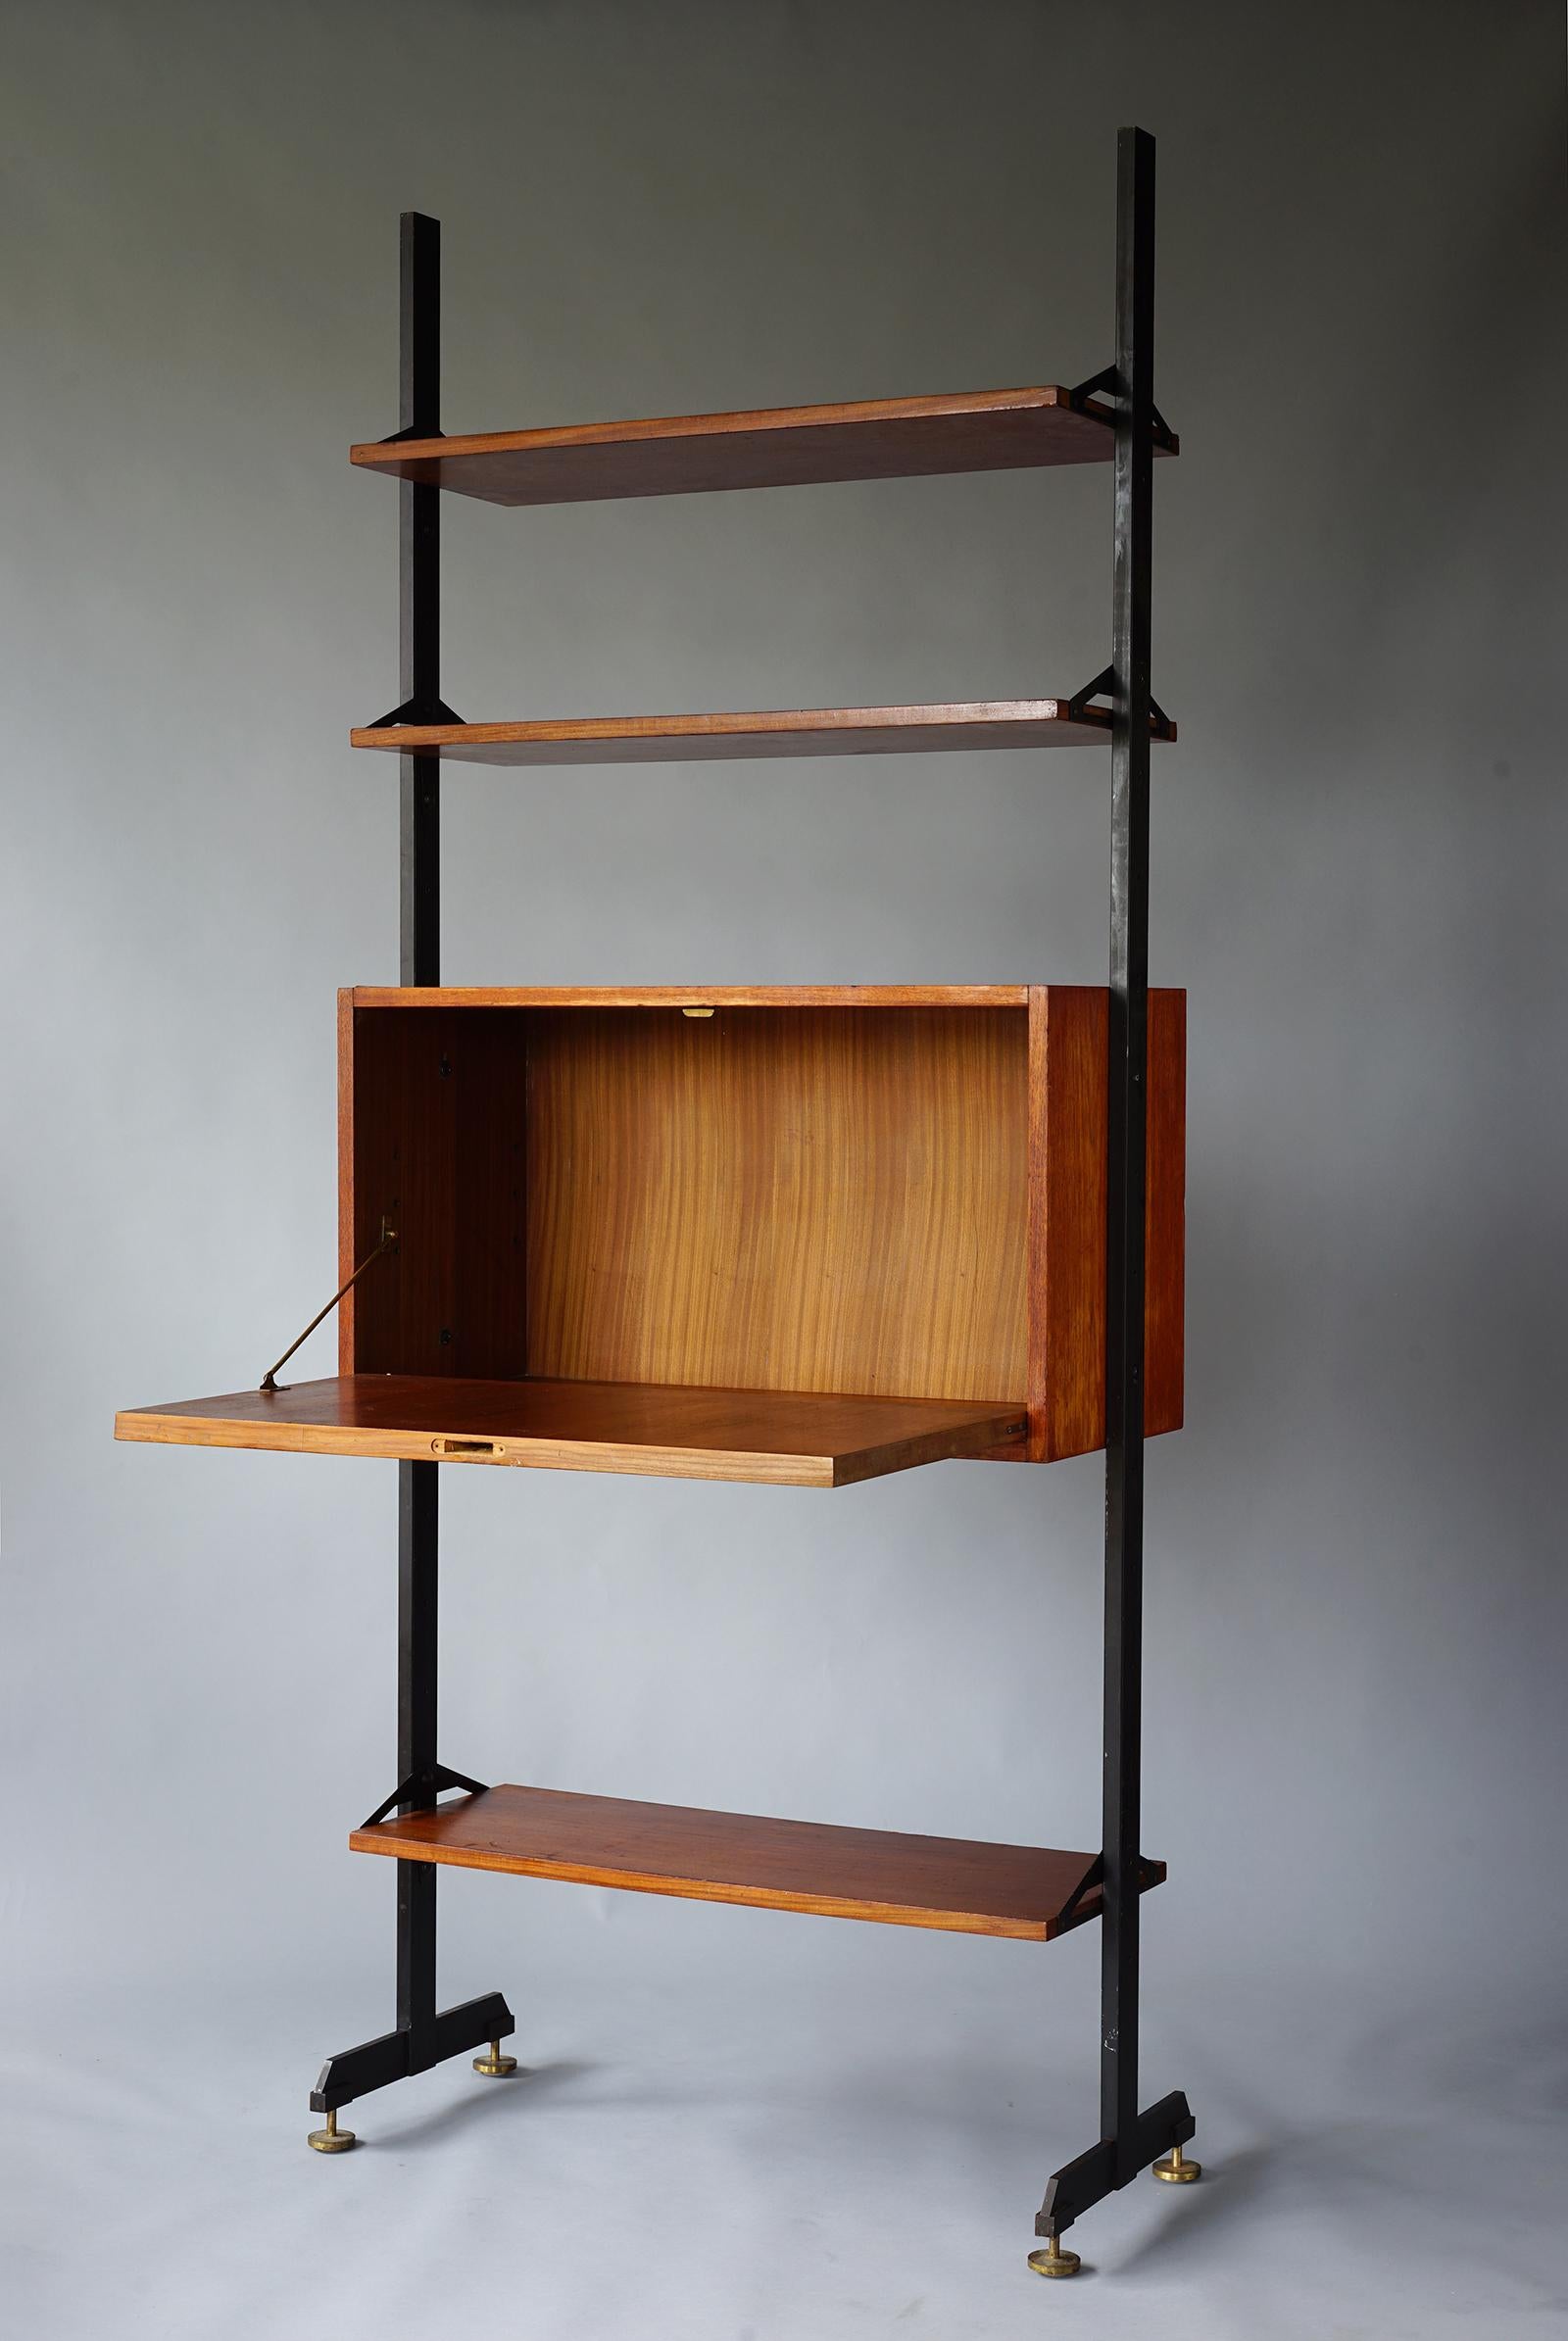 Handsome unit featuring three adjustable shelves and flip down cabinet mounted on freestanding metal rails with adjustable brass feet. Missing lock to cabinet.